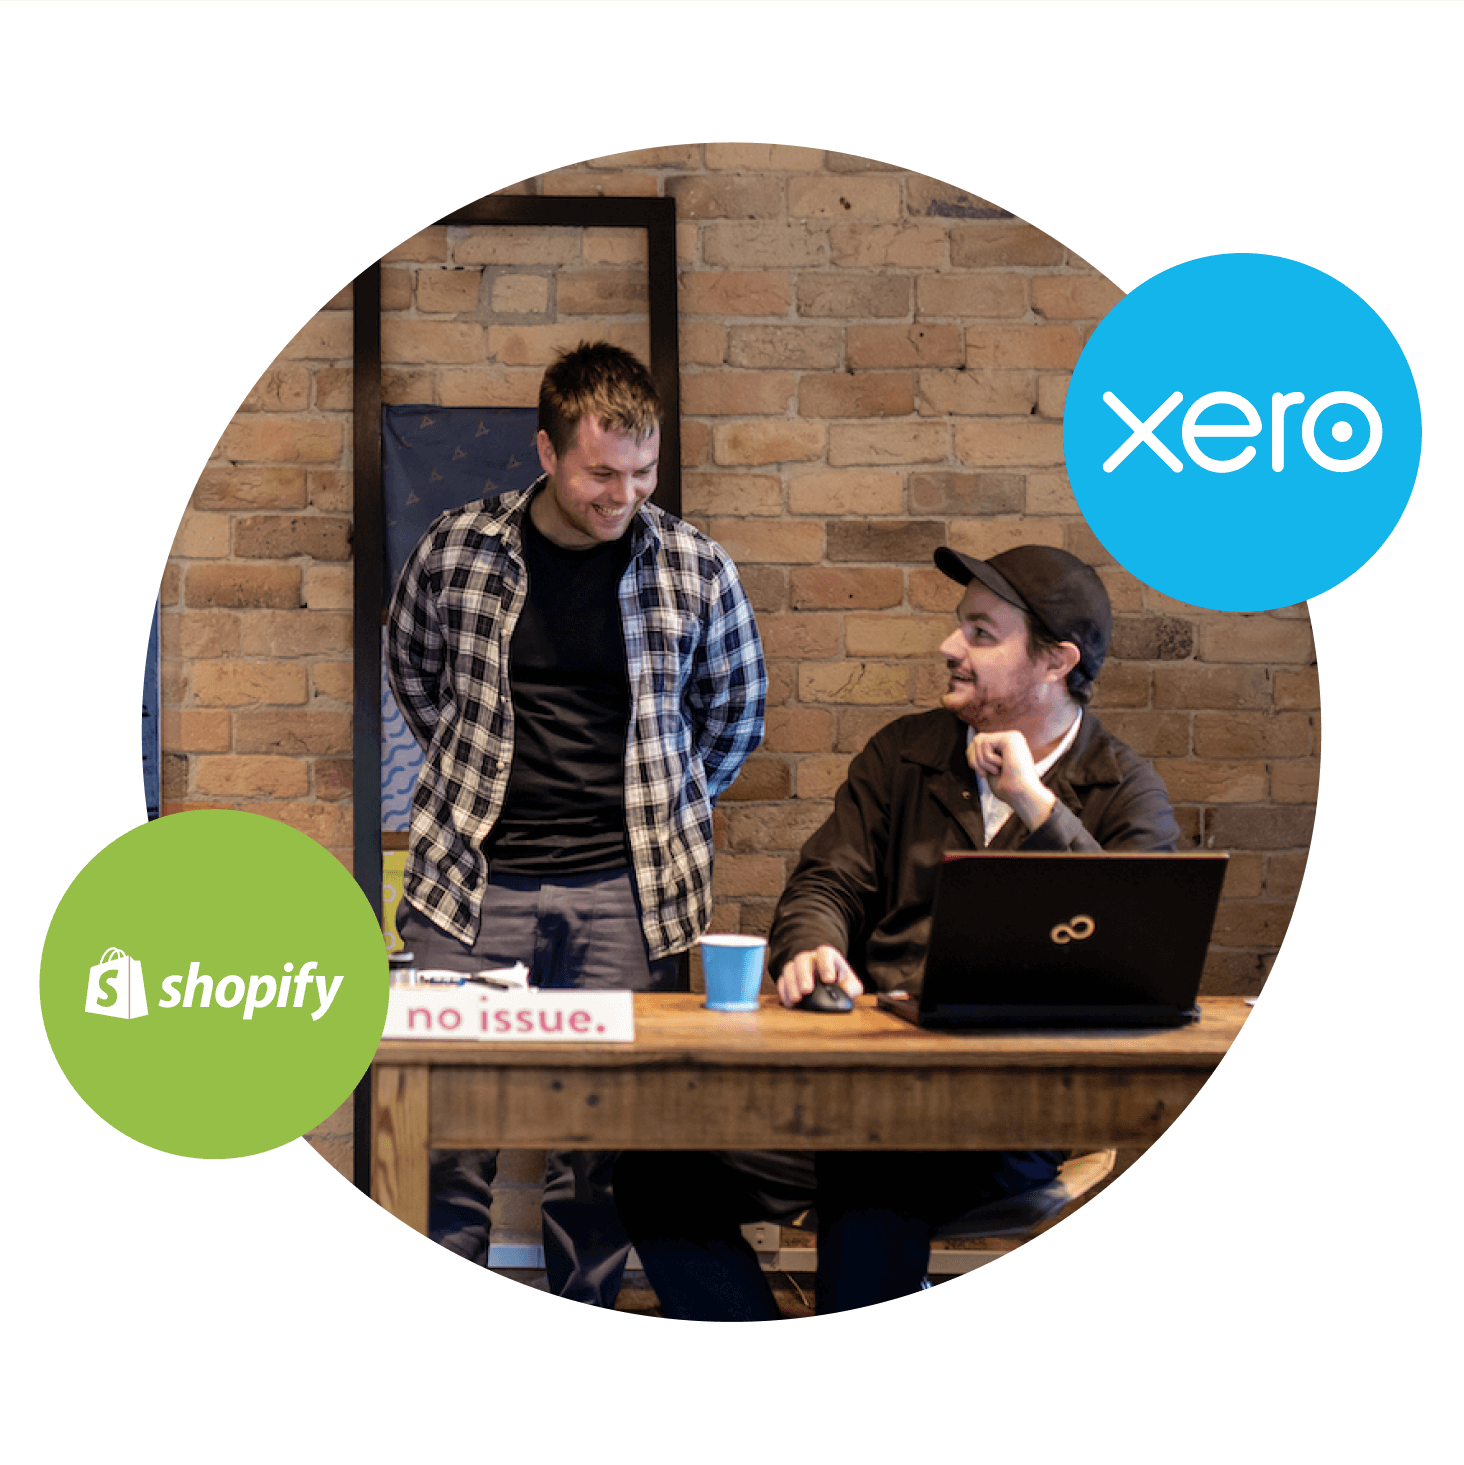 Two Australian ecommerce sellers chat about the increase in sales since using Shopify and Xero for their online store.